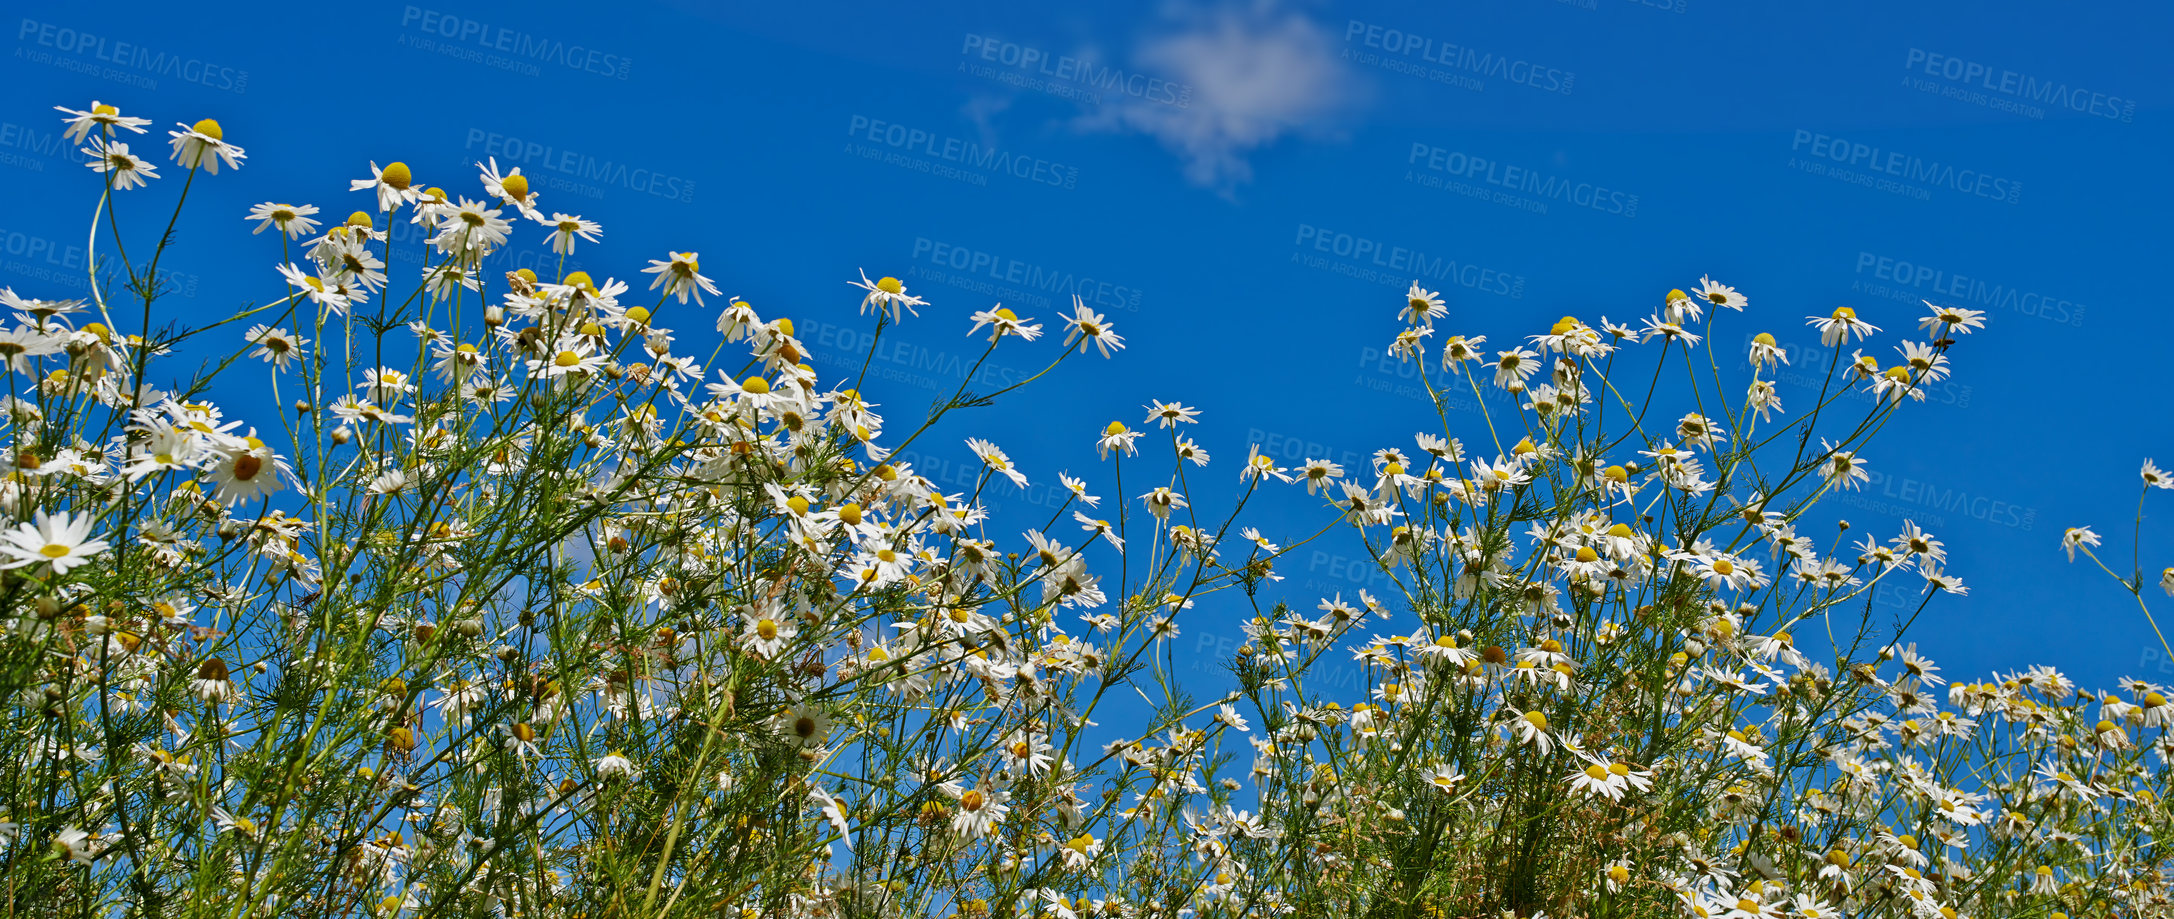 Buy stock photo A field of daisies blooming in a sunny field